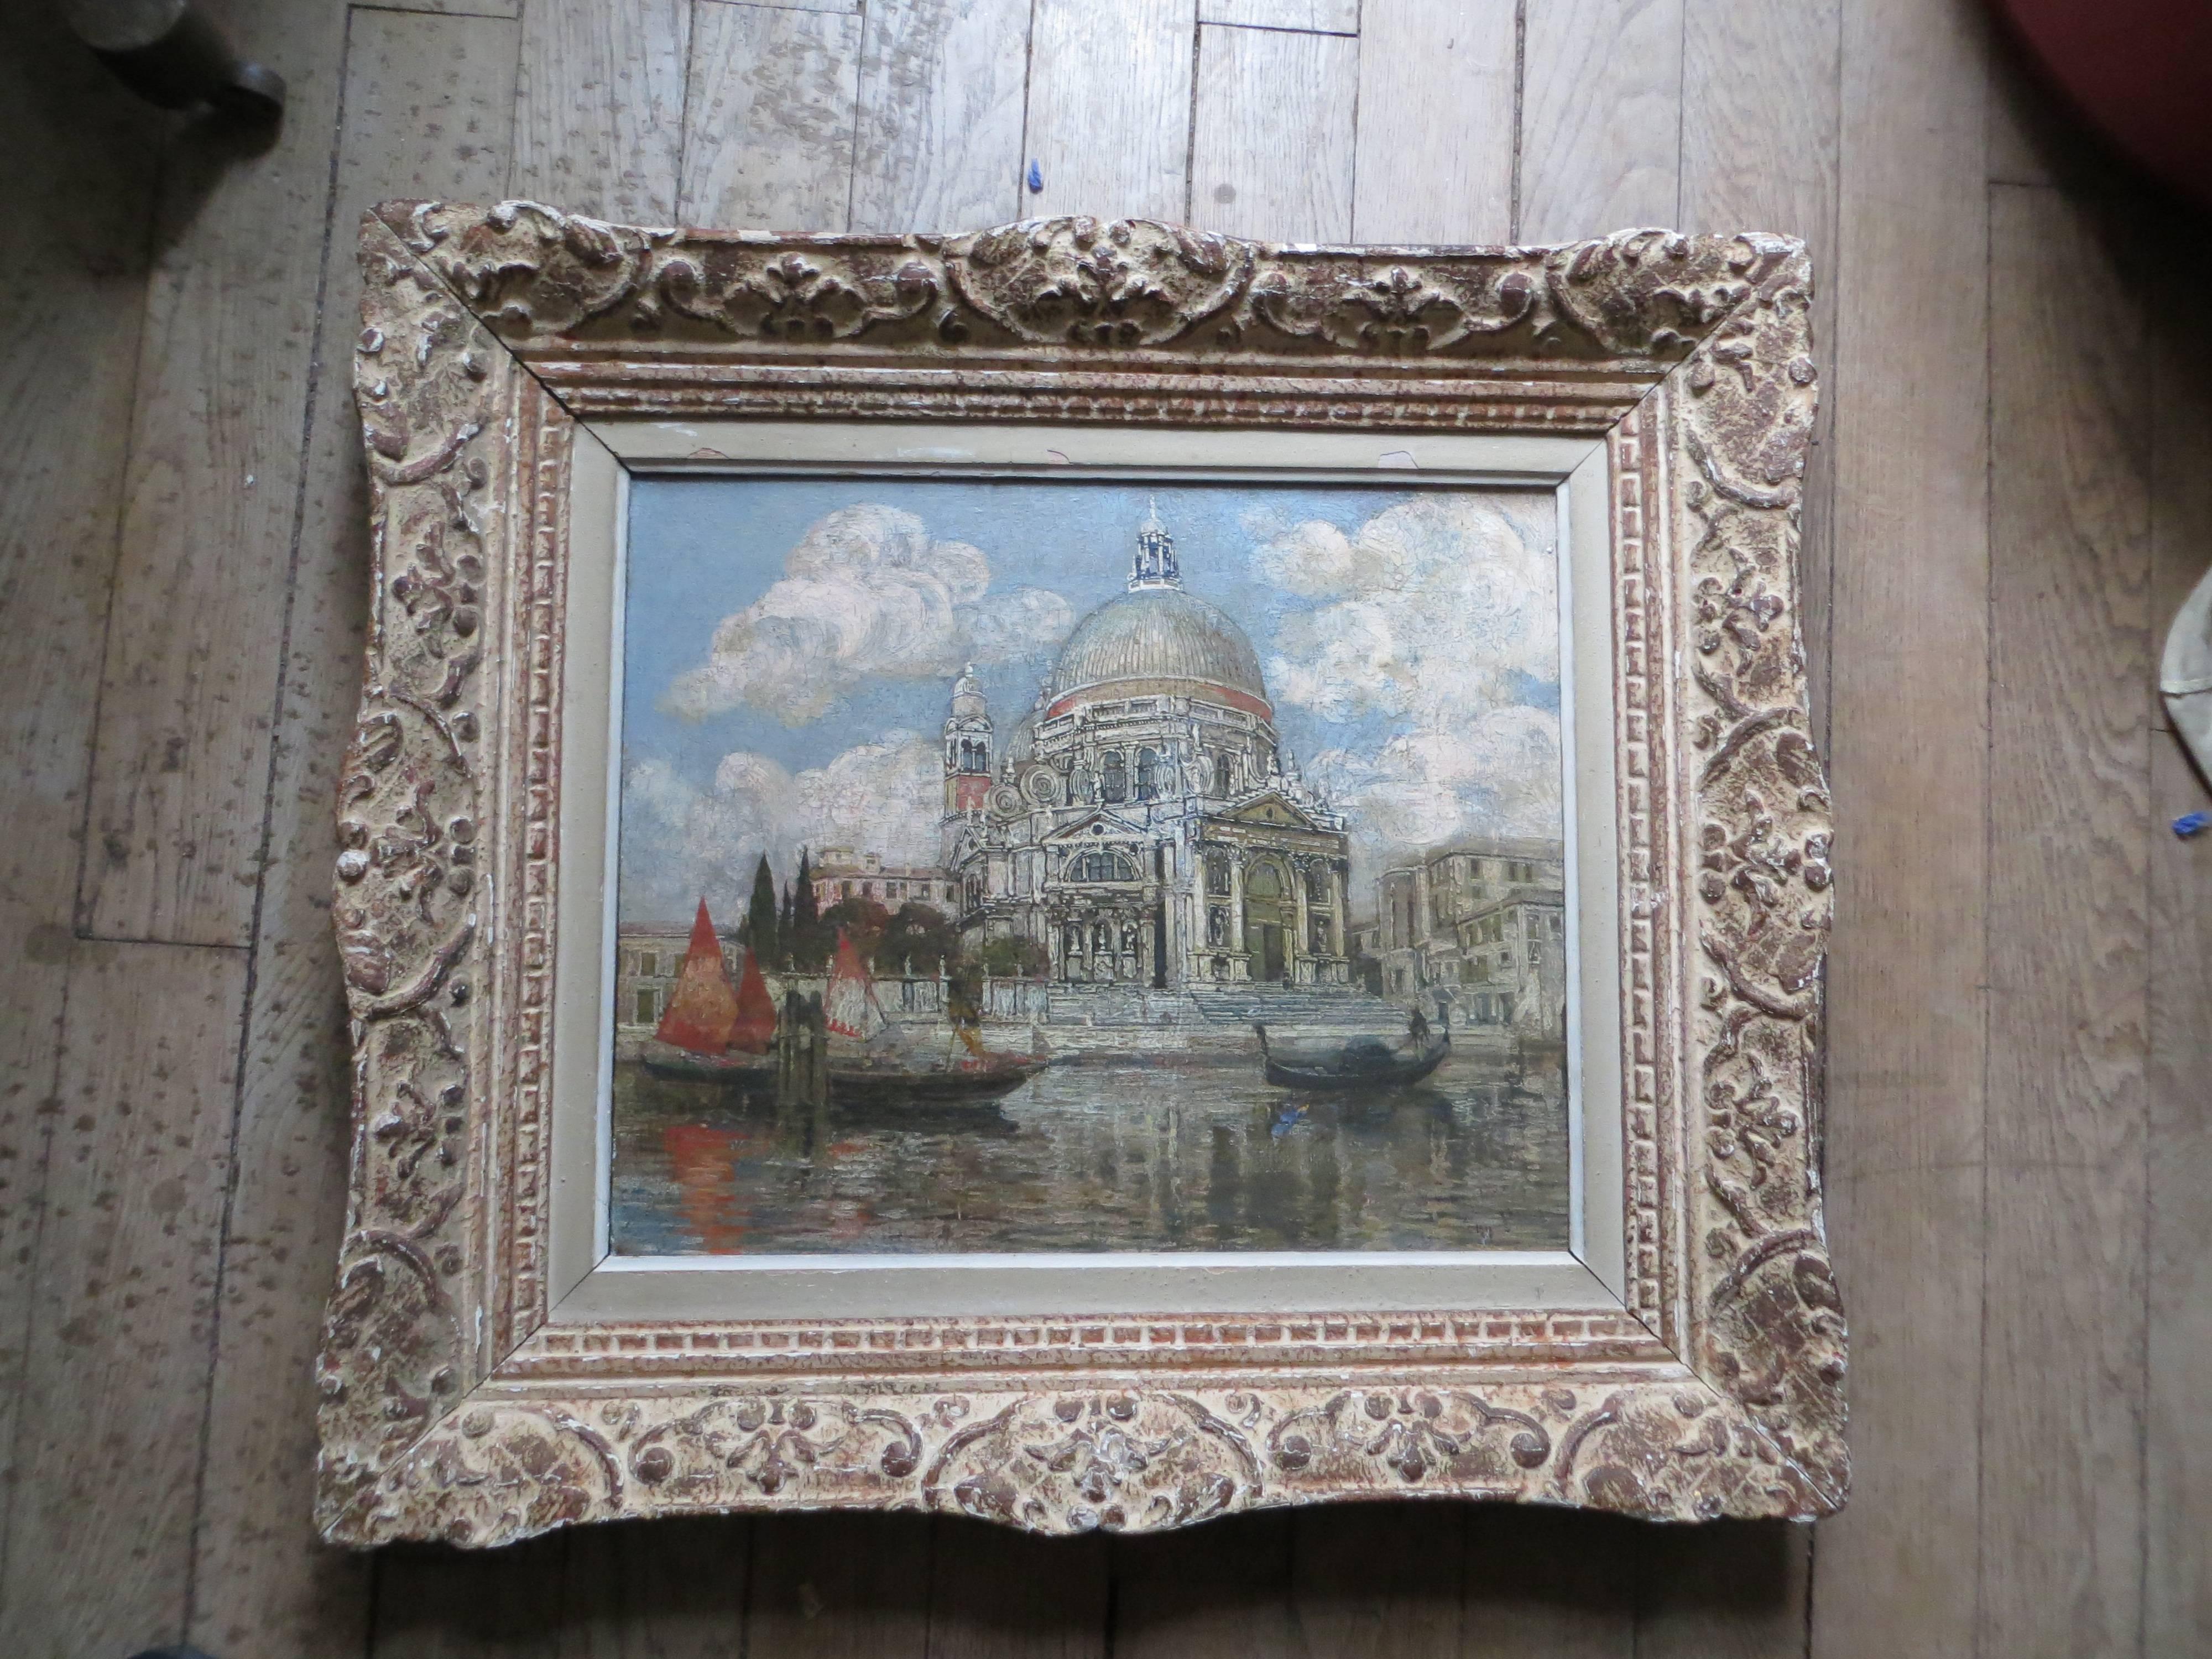 Church of La Salute in Venice  - Painting by Unknown